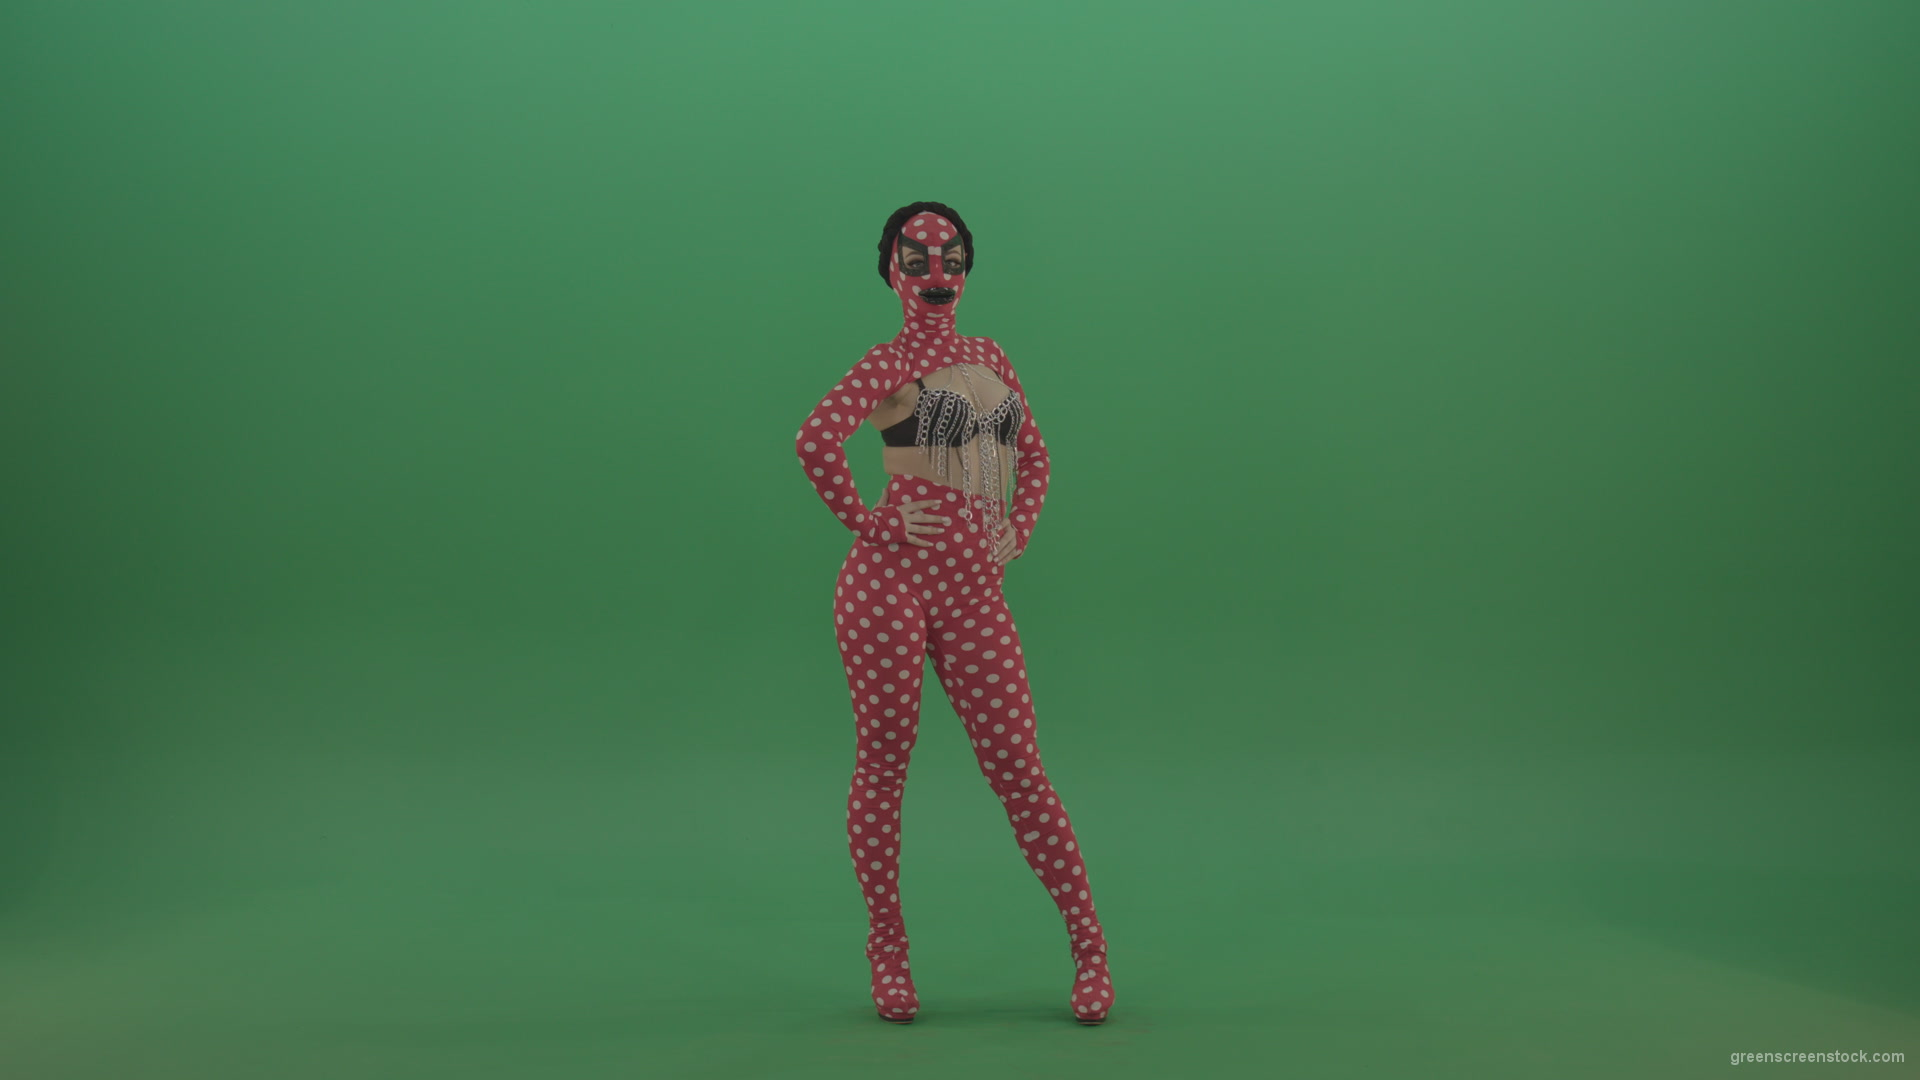 Girl-in-red-strip-dance-costume-in-front-view-posing-isolated-on-green-screen_001 Green Screen Stock